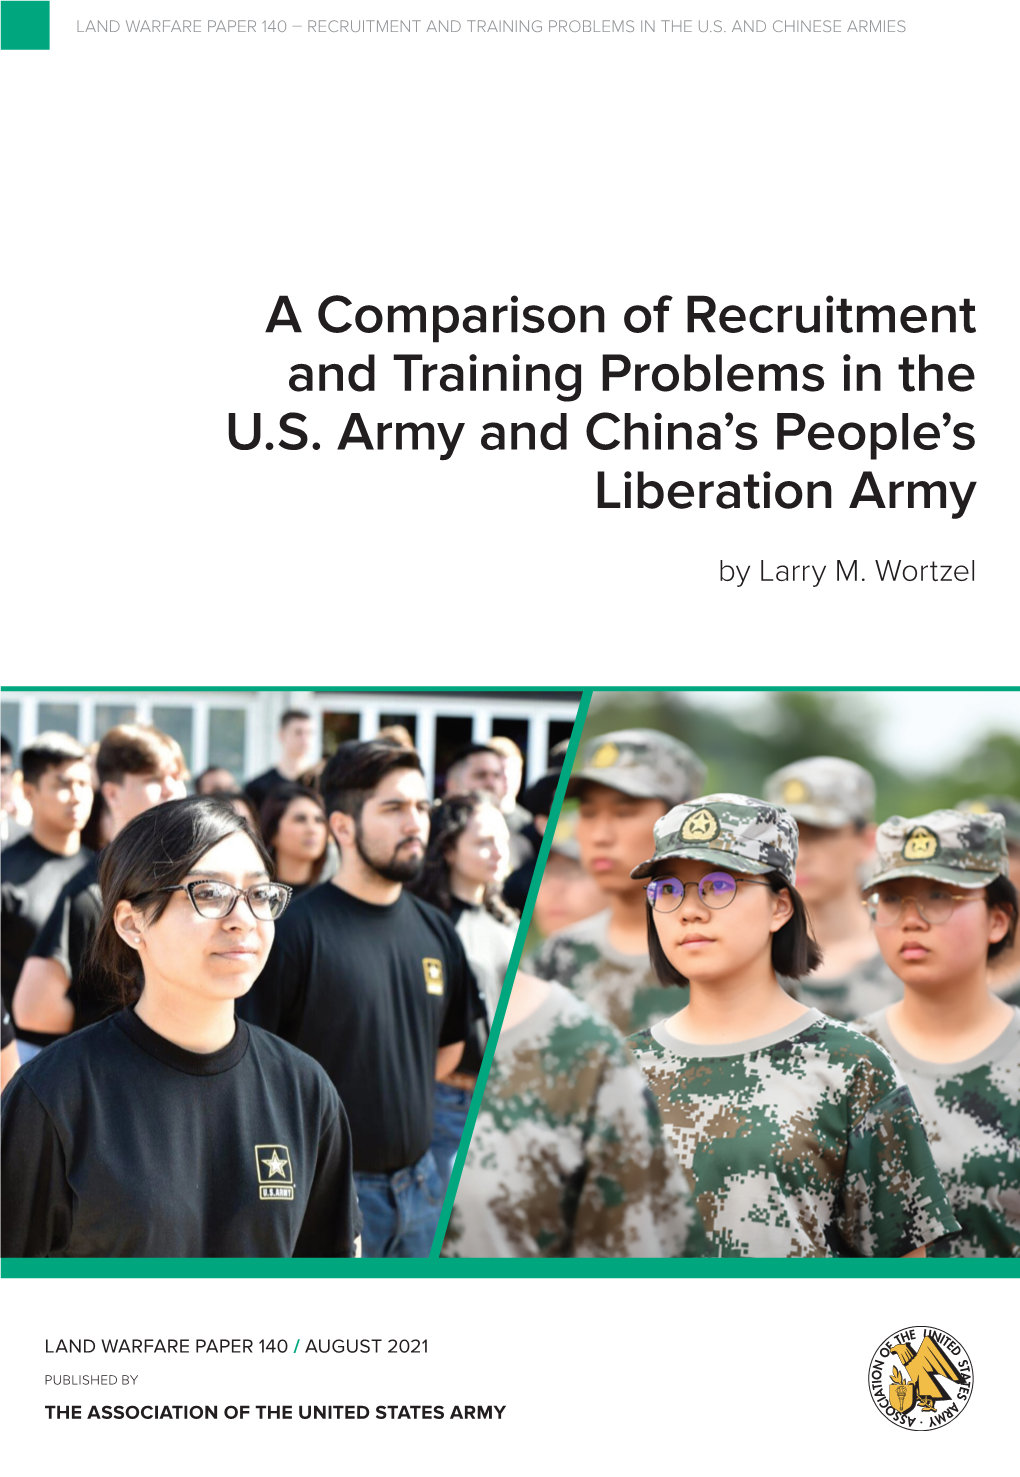 A Comparison of Recruitment and Training Problems in the U.S. Army and China's People's Liberation Army